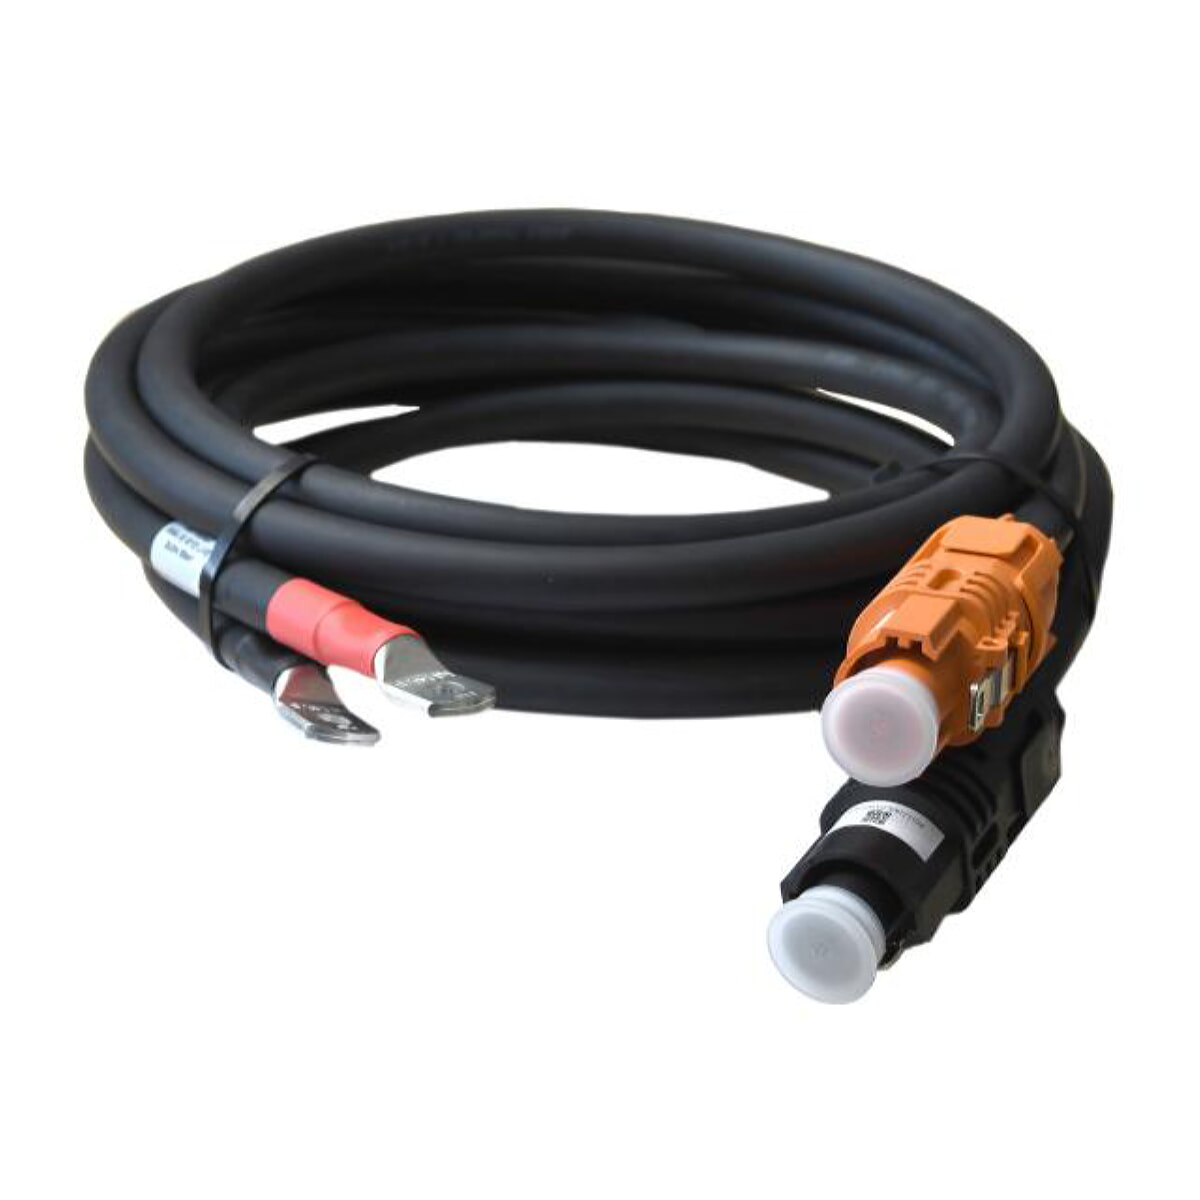 HiS DC cable SMA SI/BYD LVS 2x3 m, 50mm²